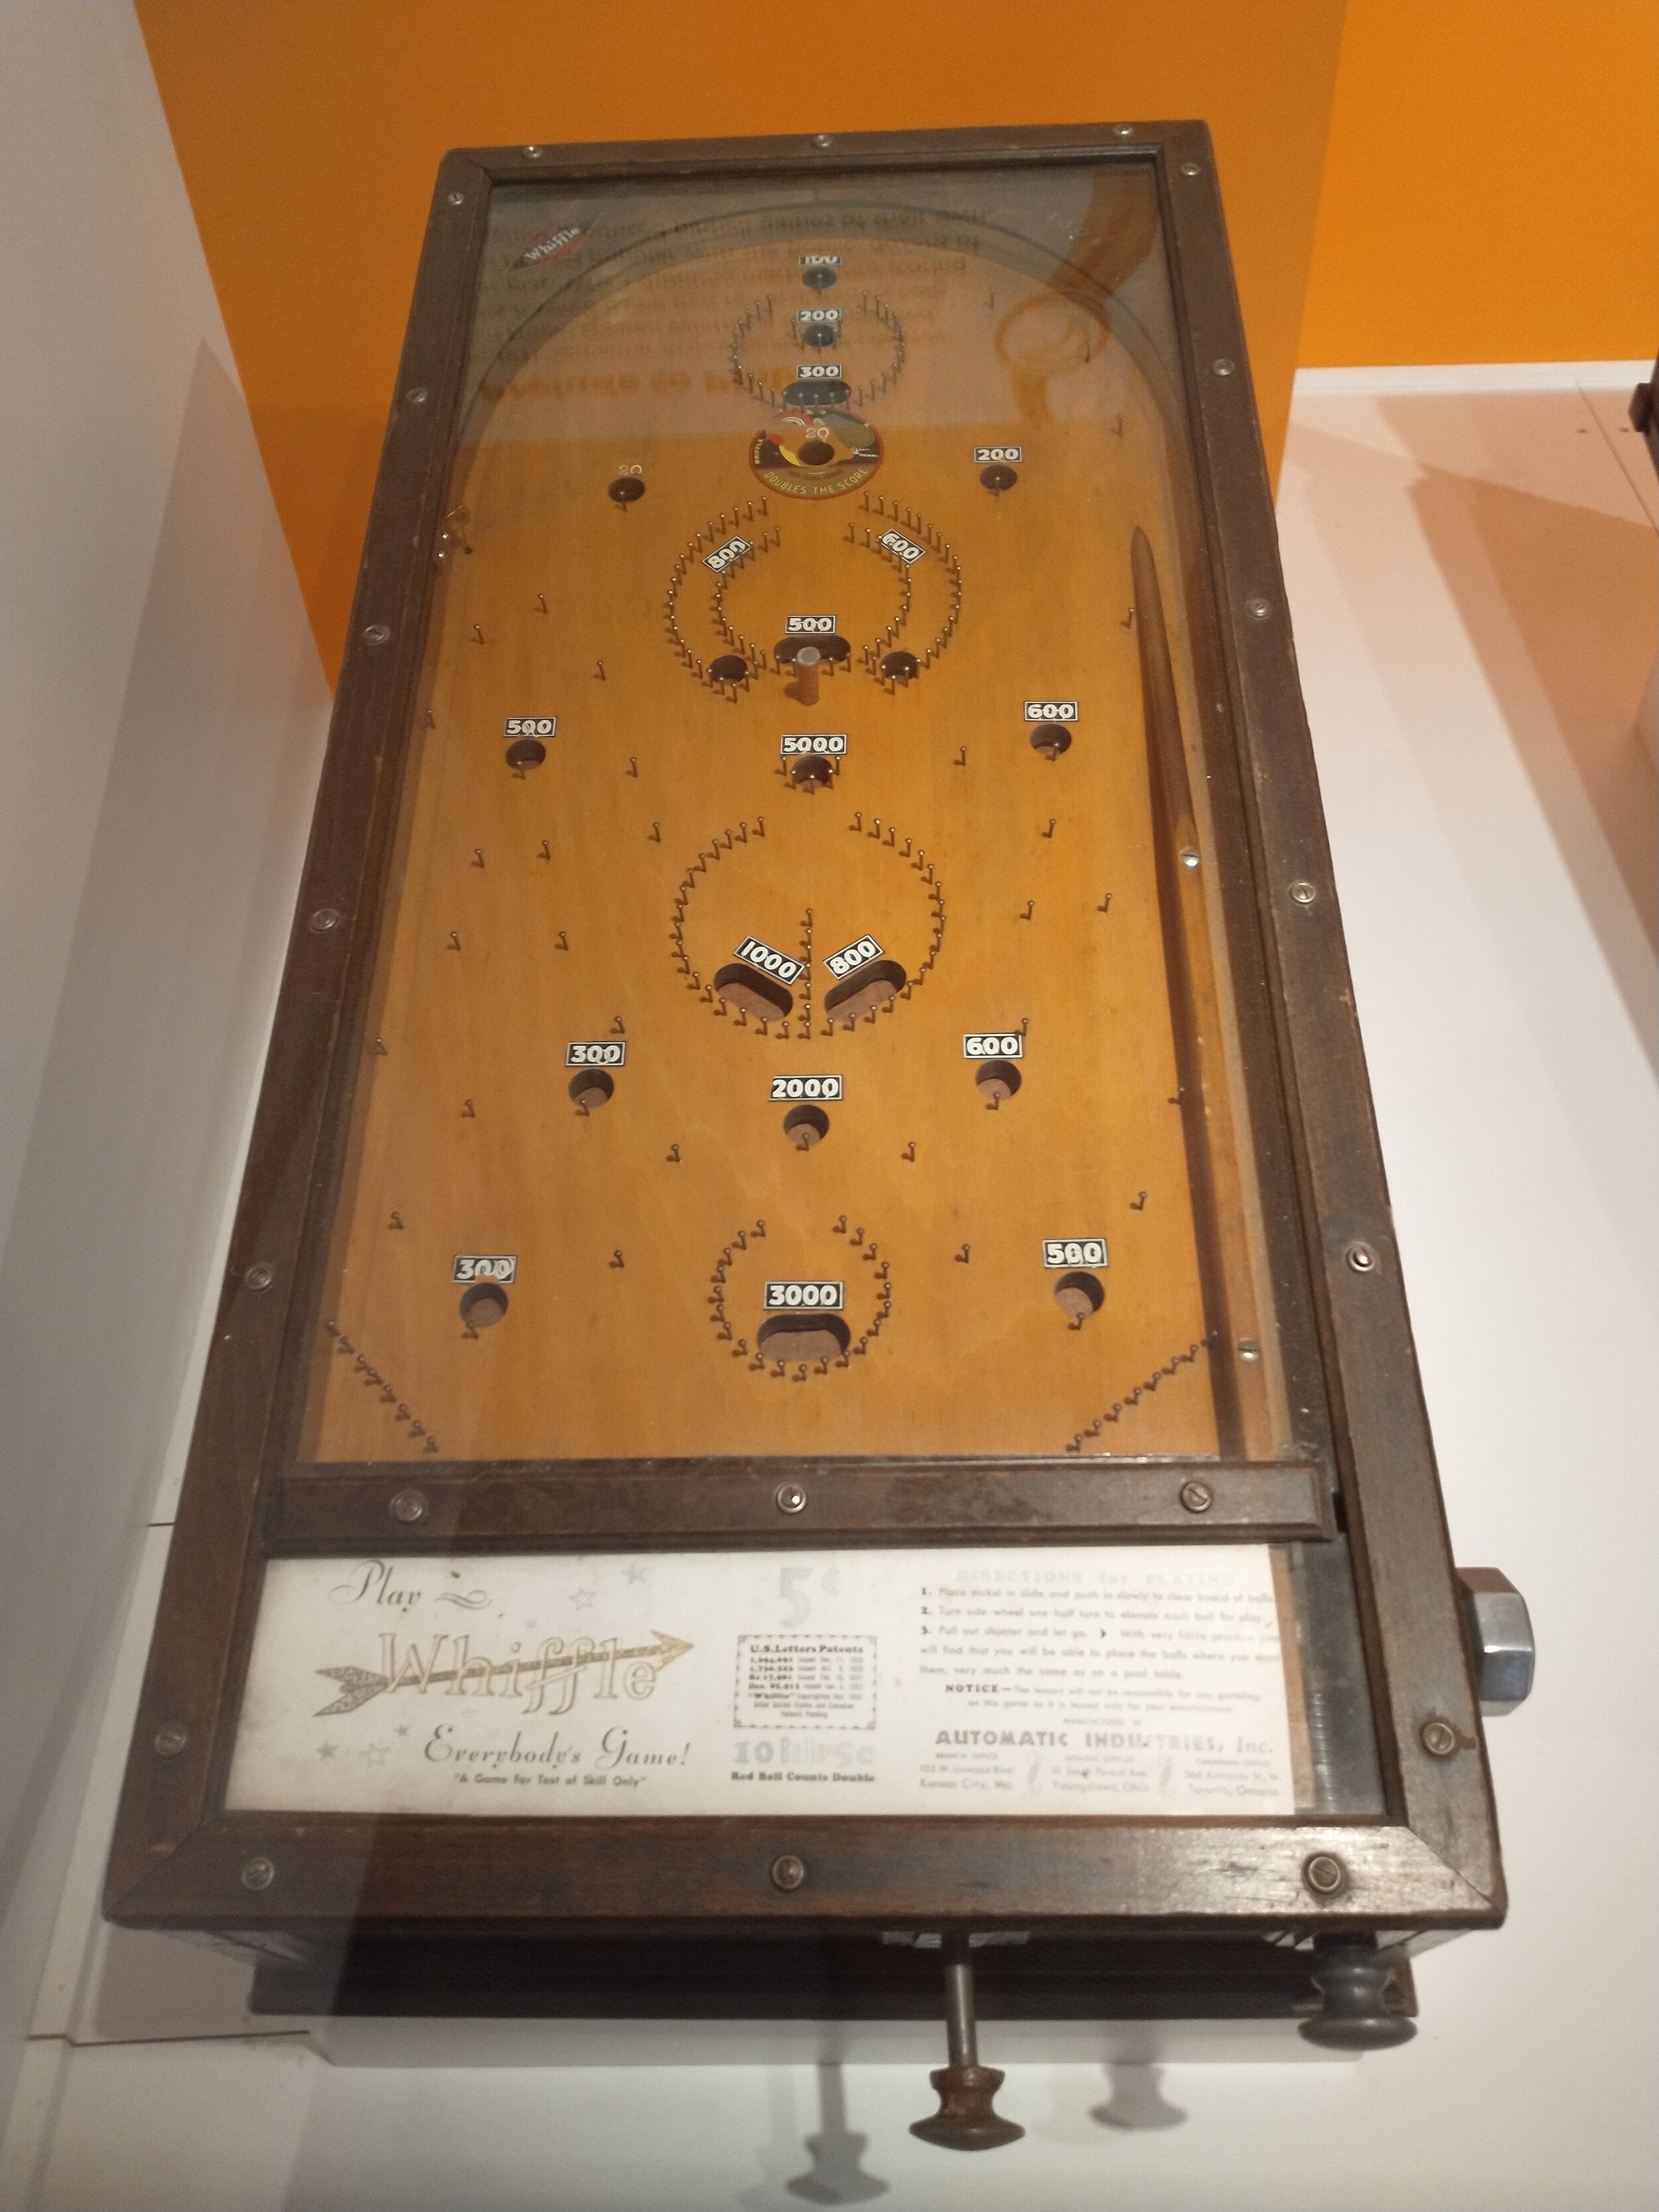 One of the very first pinball(ish) machines ever!